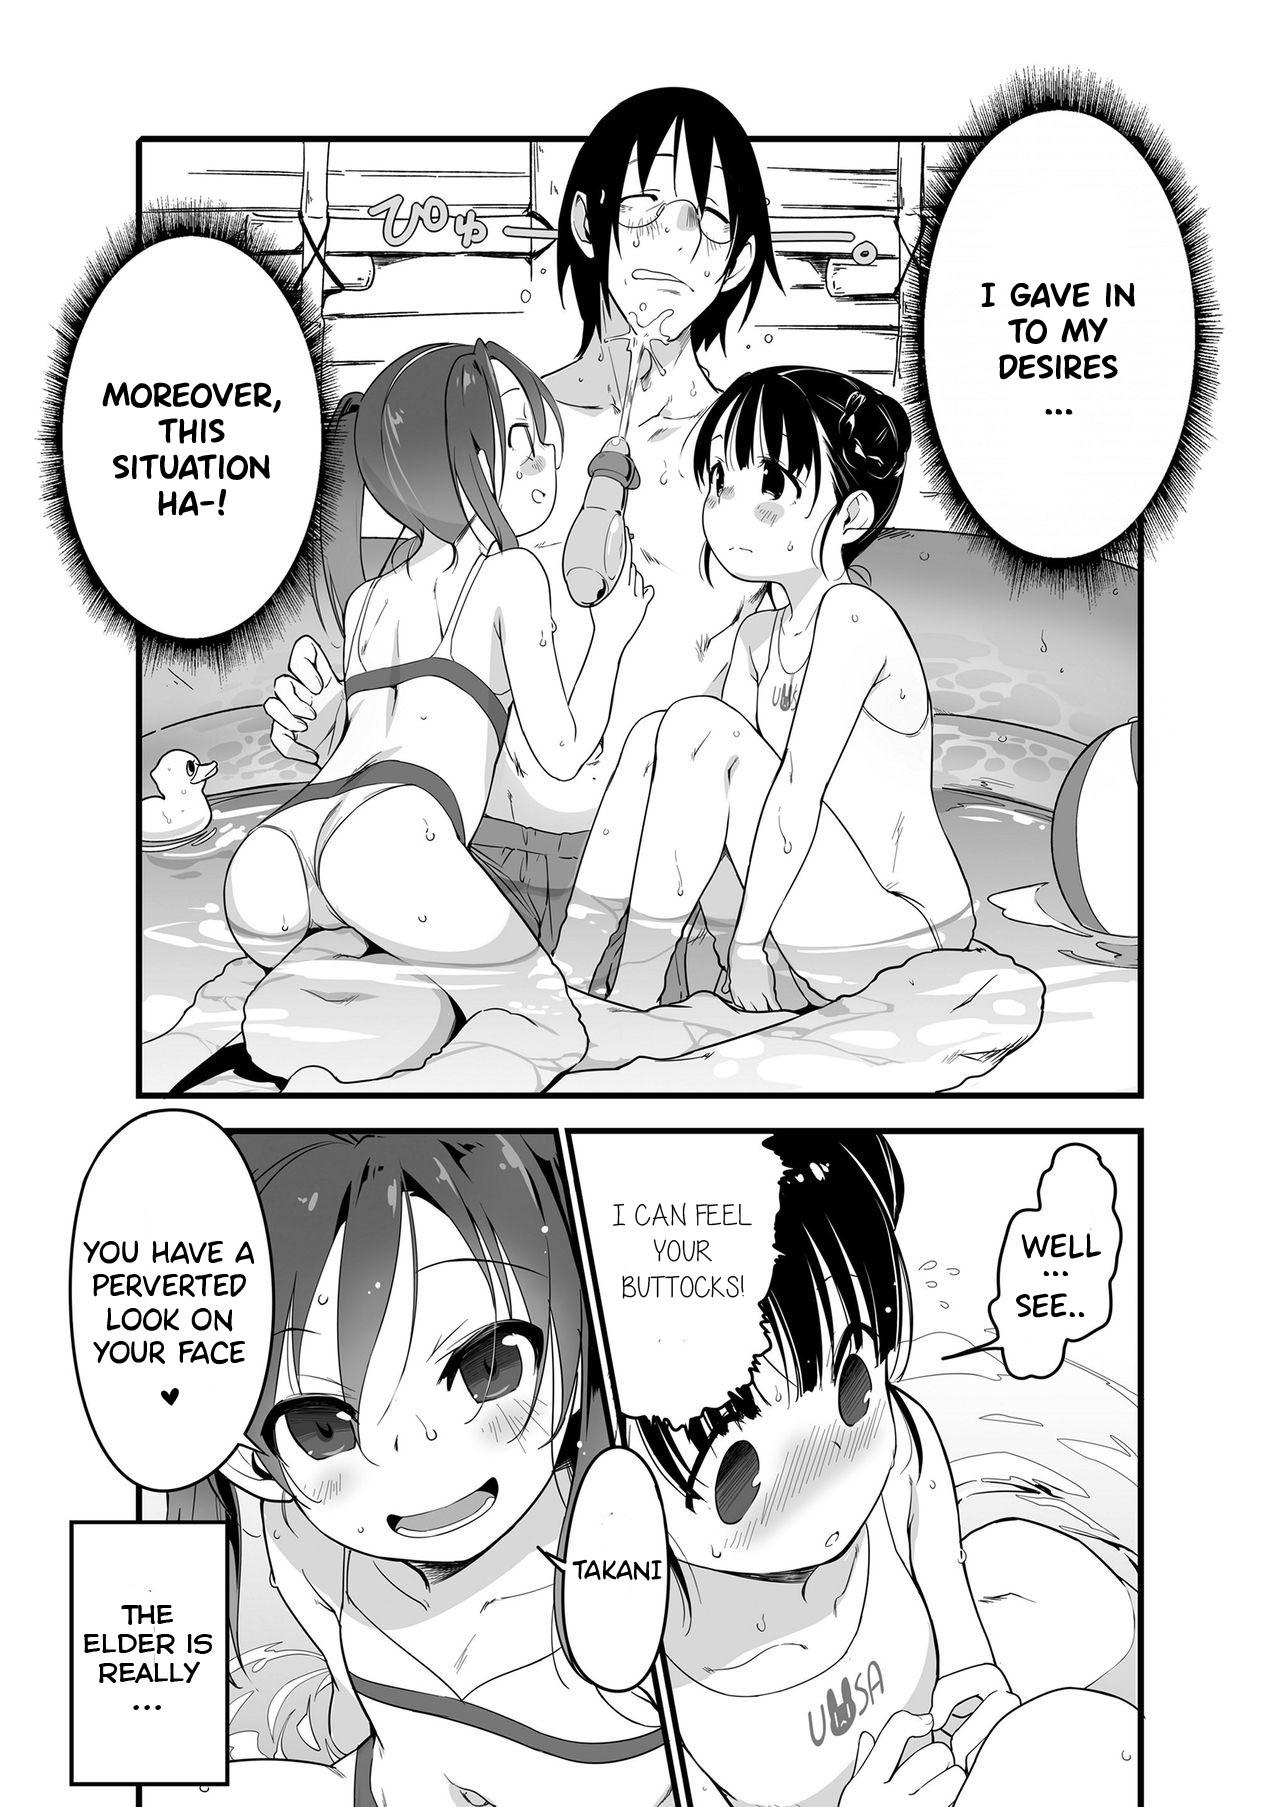 Bisex Uchiage Hanabi, Ane to Miruka? Imouto to Miruka? | Fireworks, Should we see it with the elder sister or the younger sister? Pegging - Page 6